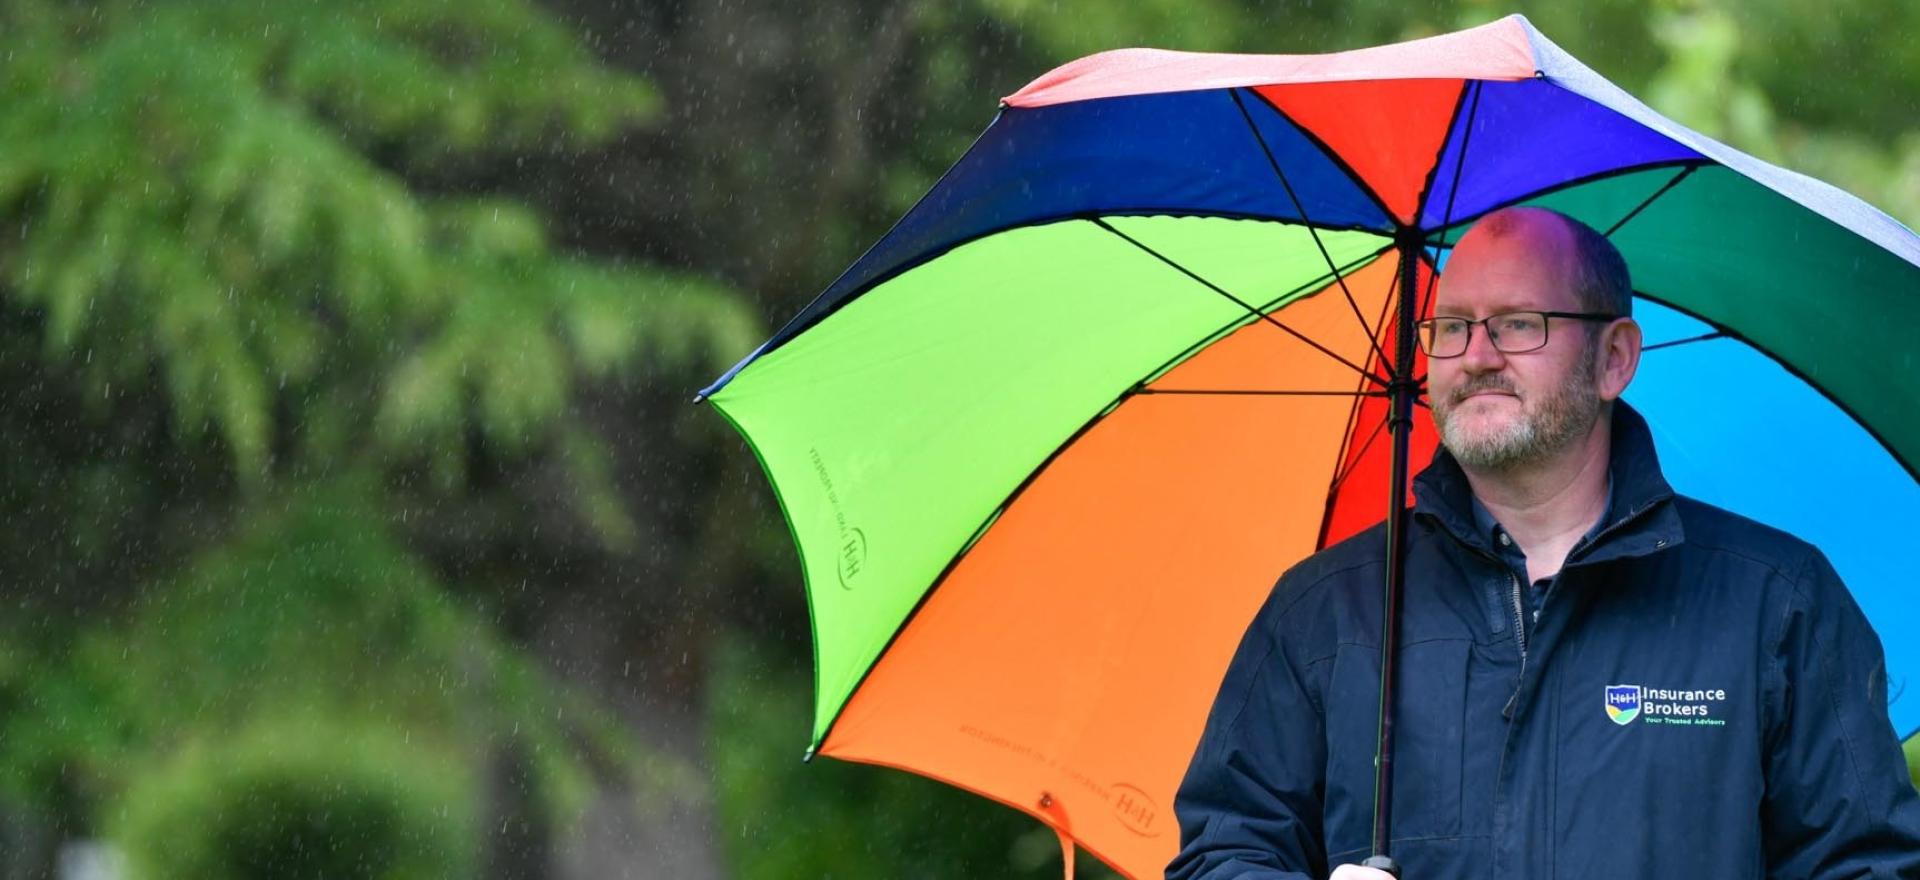 Stuart Torrance, Claims Manager at H&H Insurance Brokers standing in the rain under a colourful umbrella